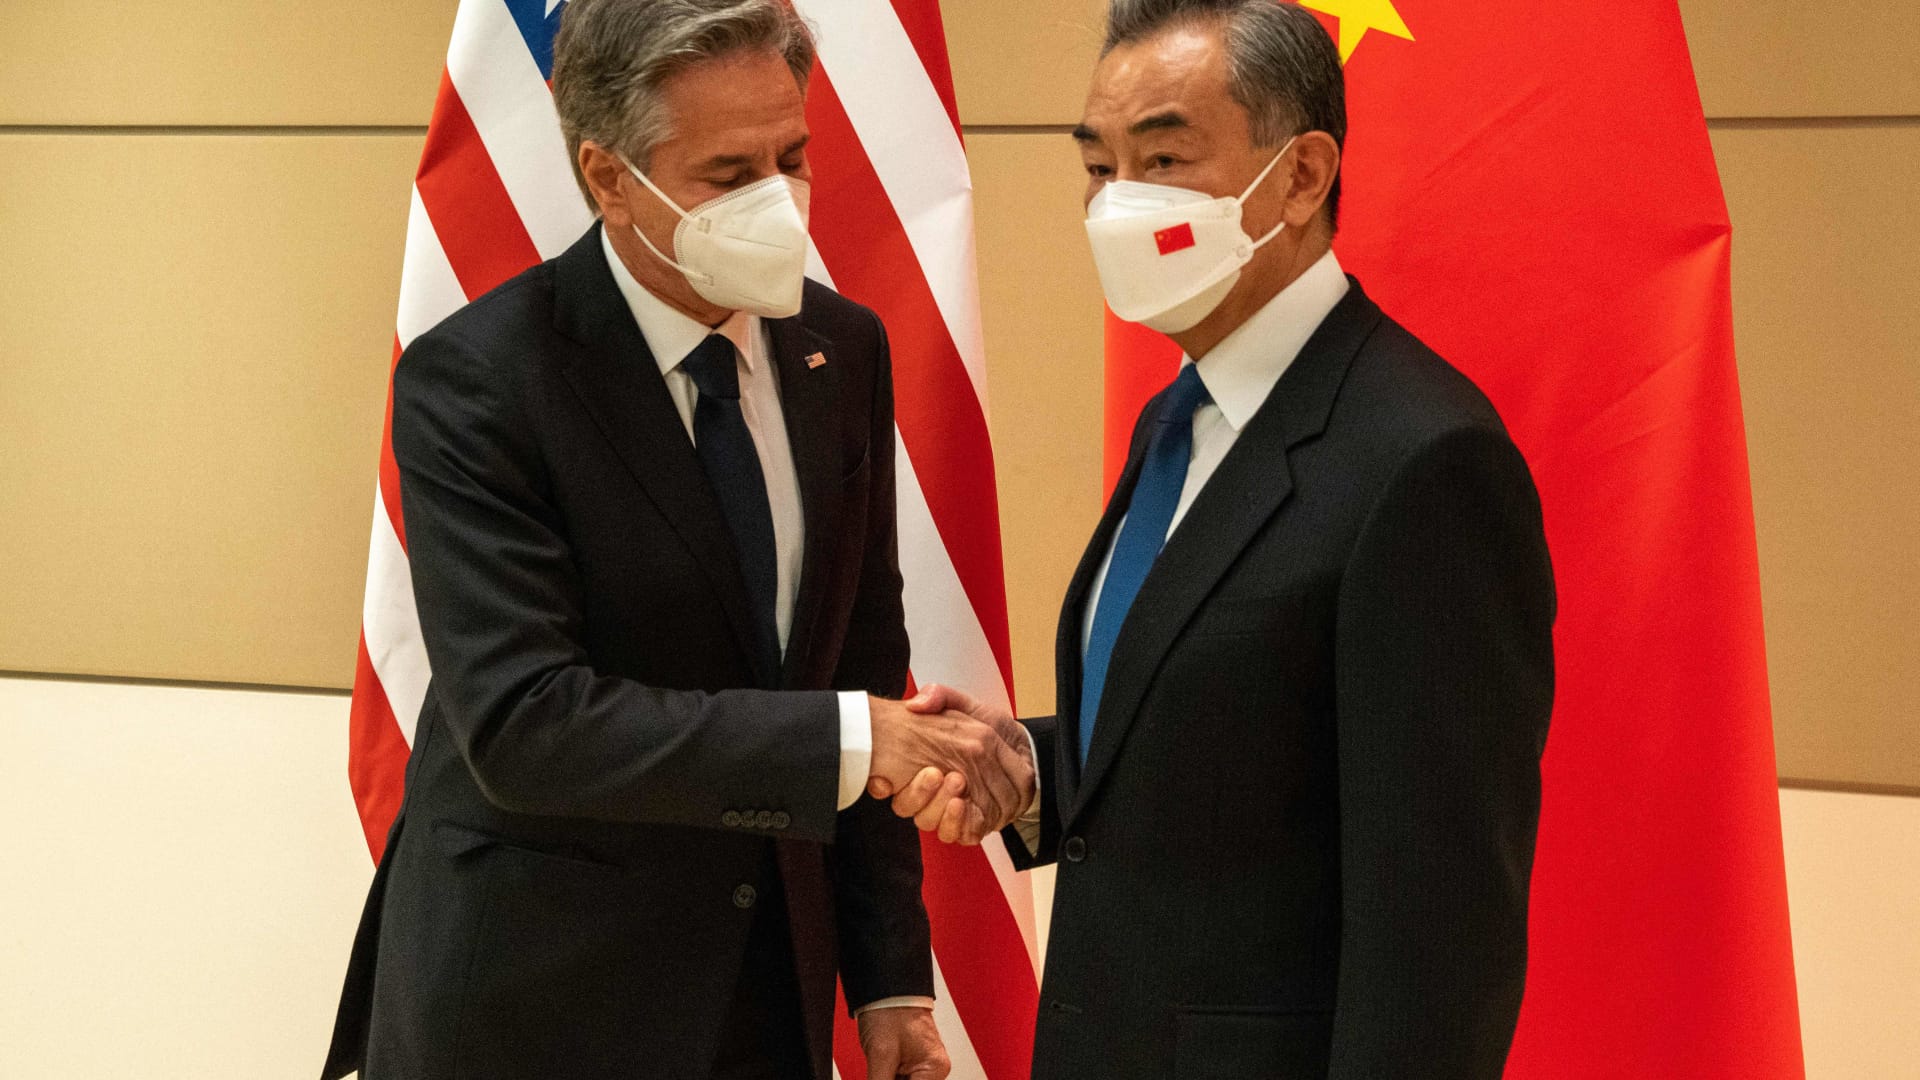 China's leadership reshuffle puts greater weight on relations with the U.S.